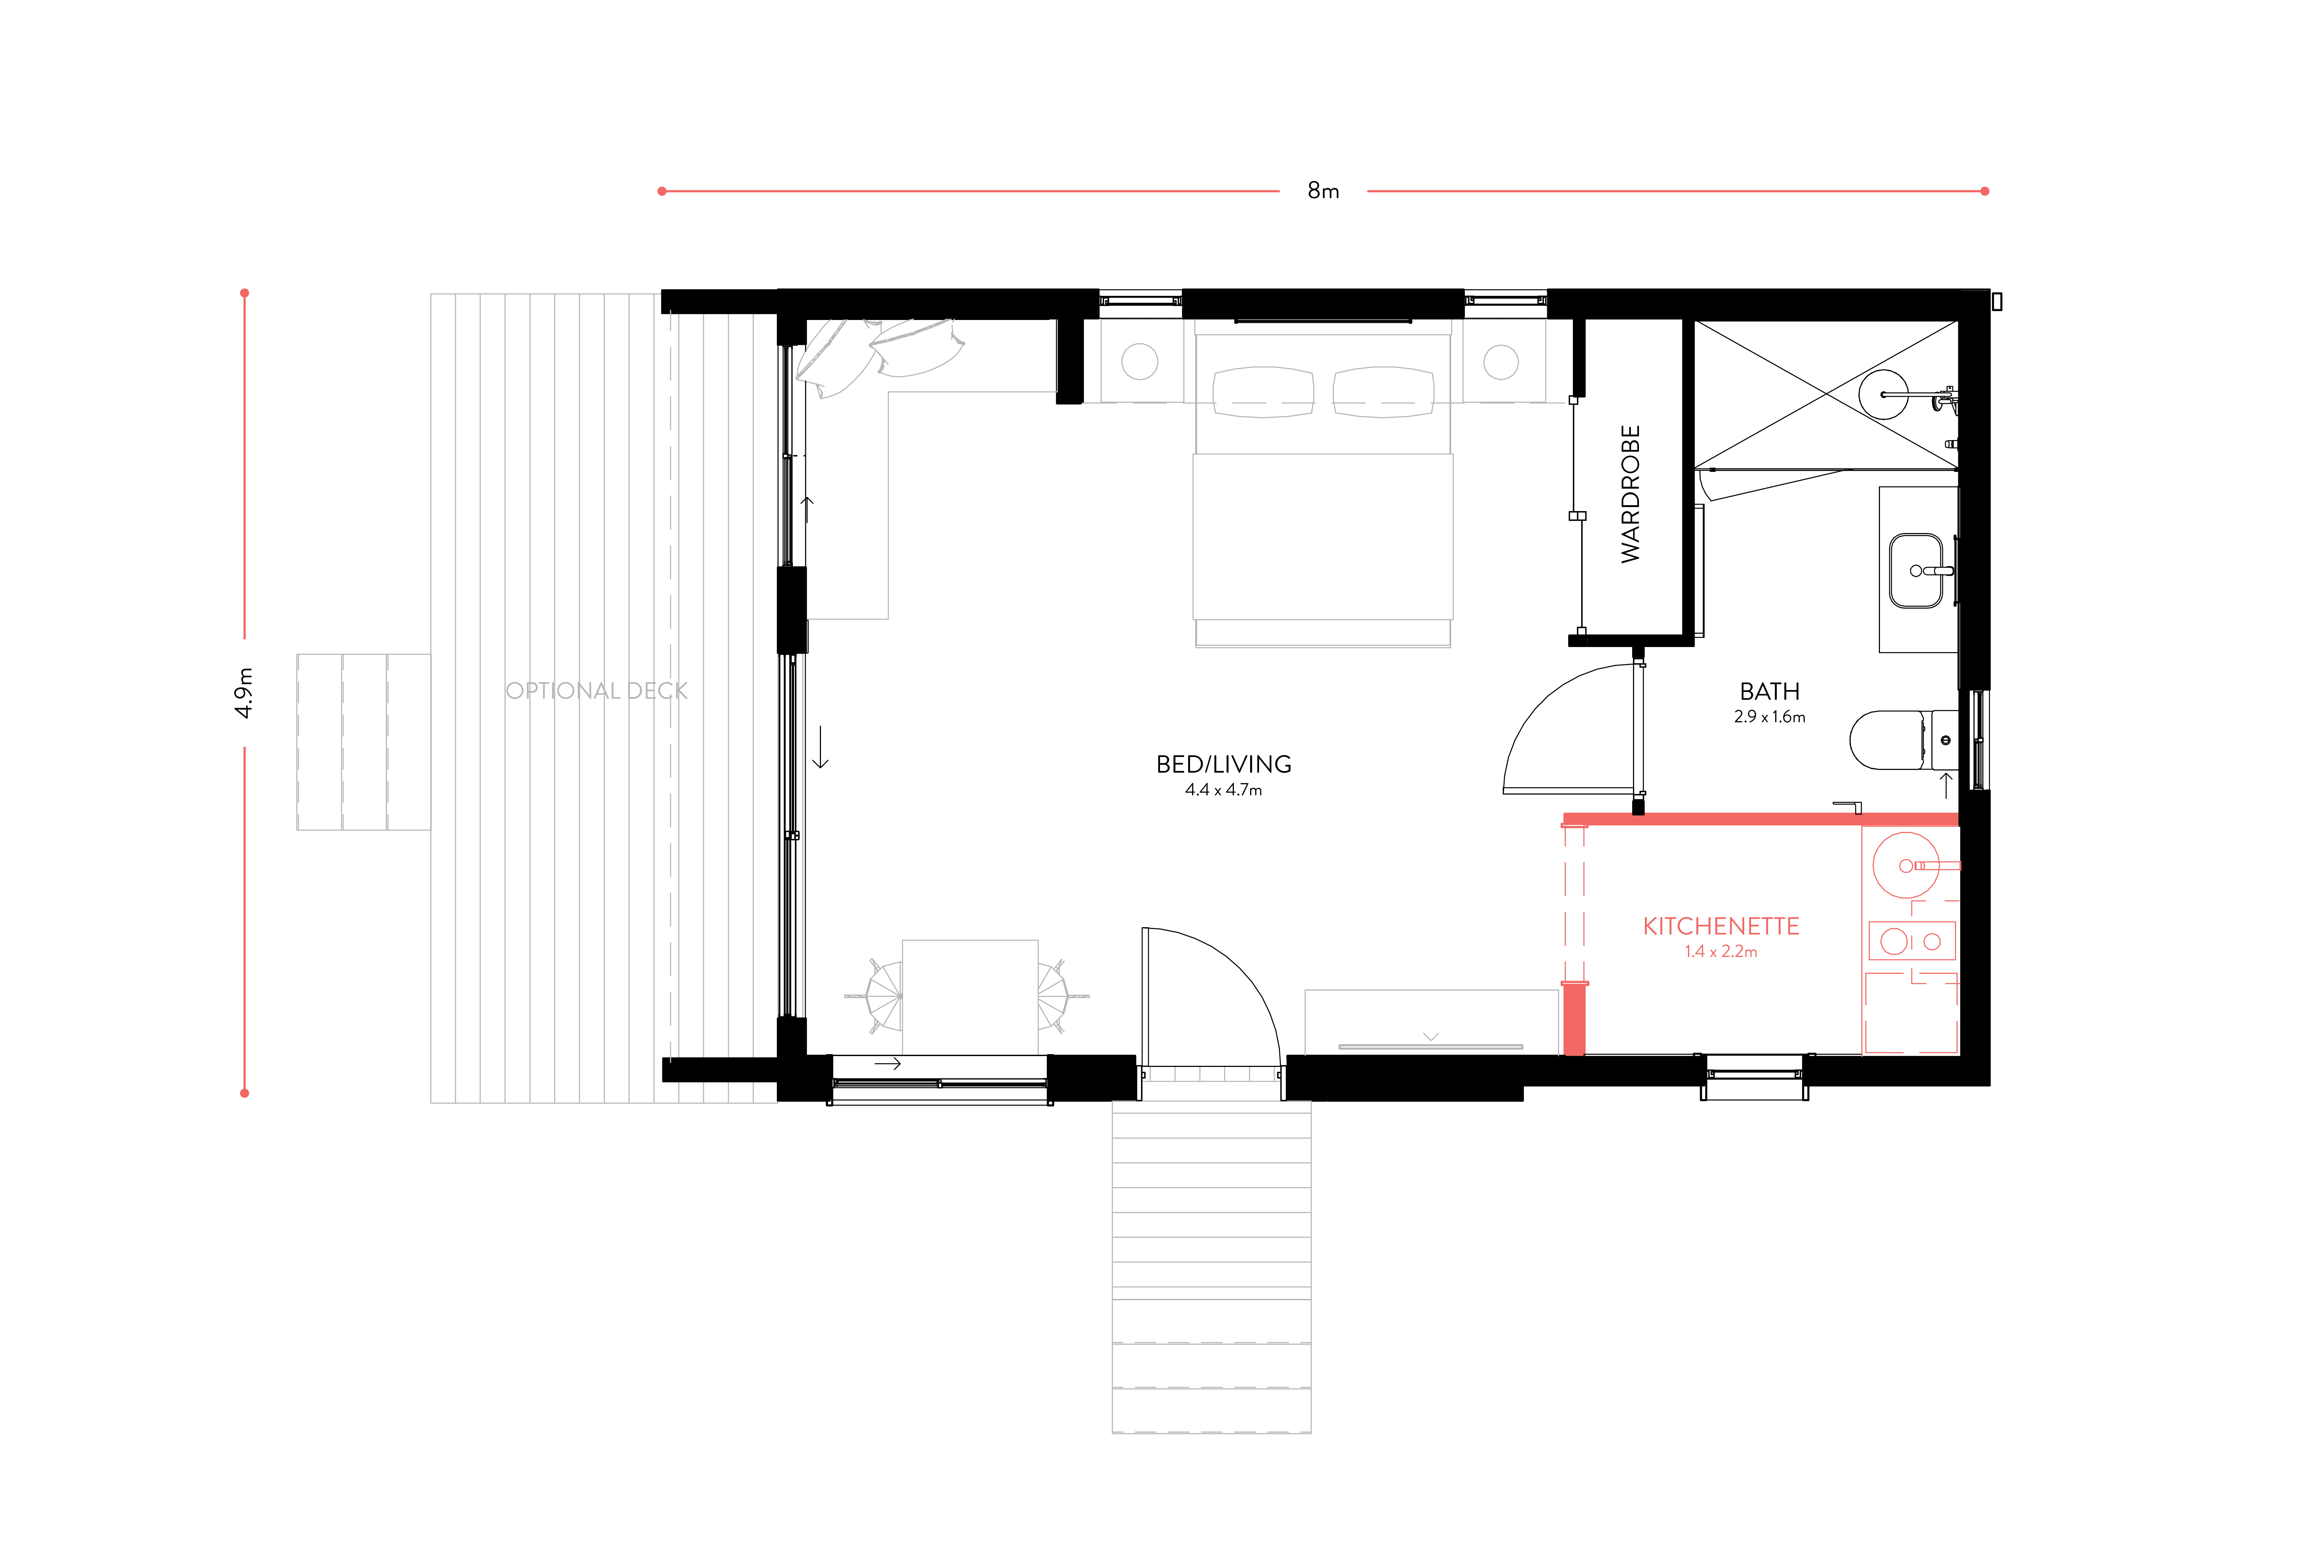 Floorplan of PLACEit modular home - Hobby with kitchenette